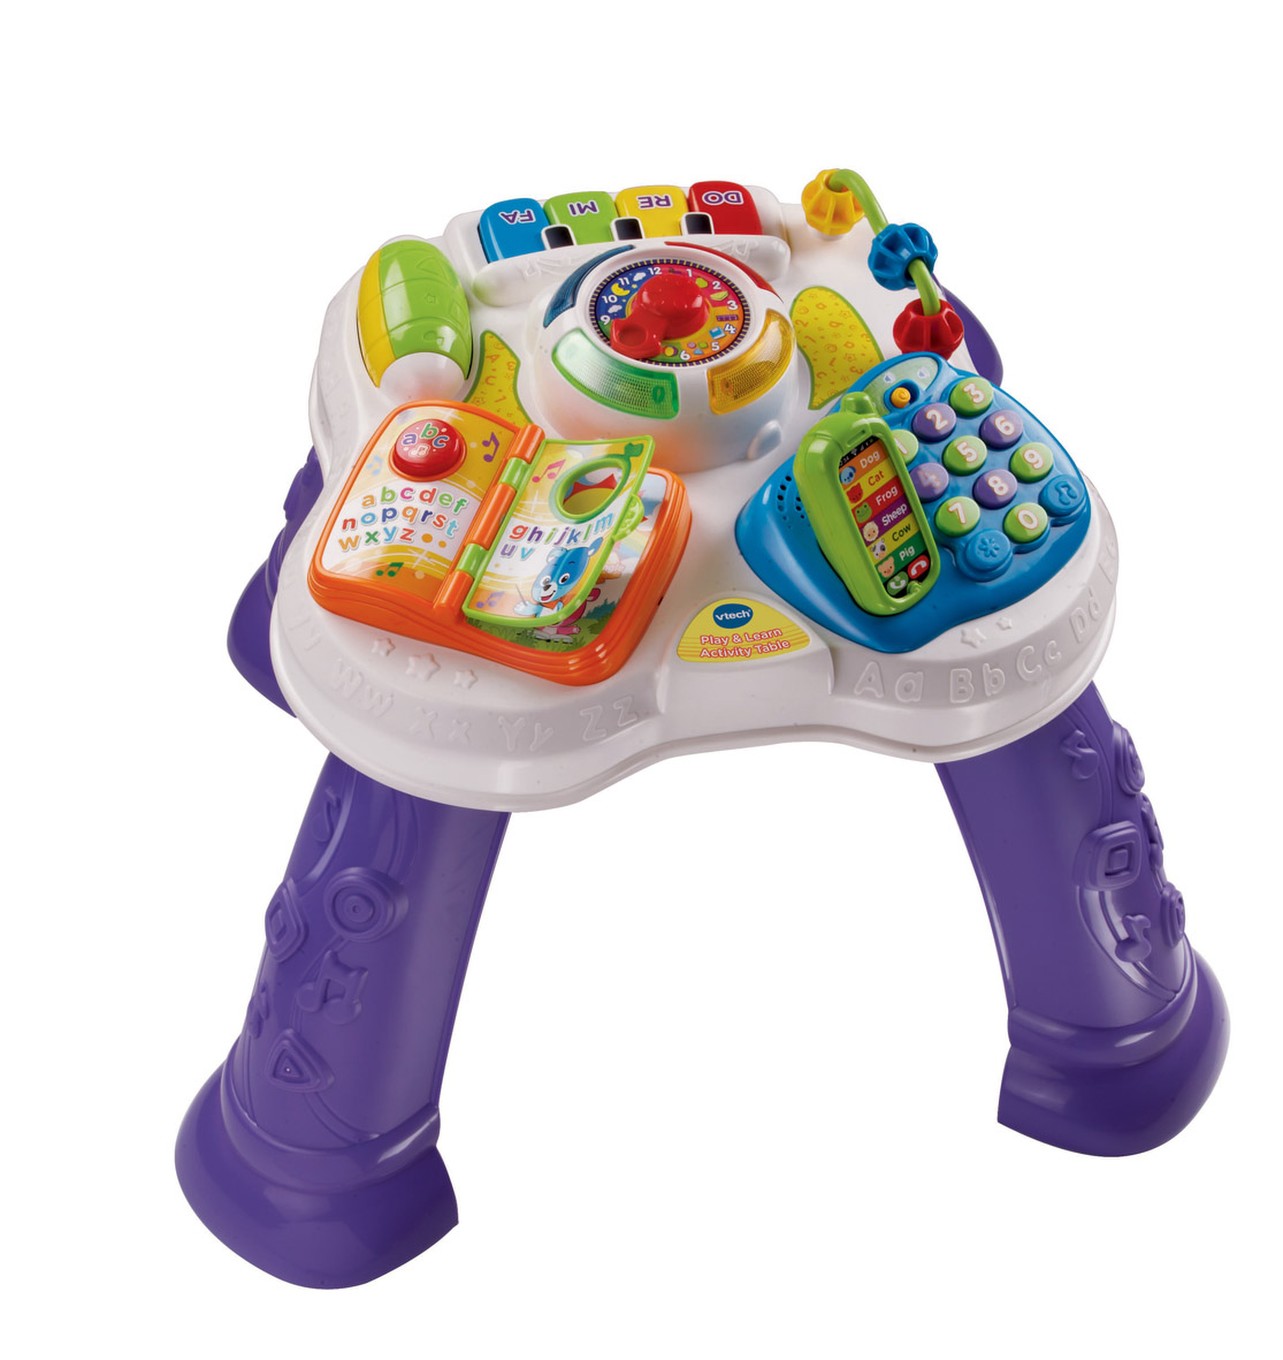 https://www.vtech.co.uk/assets/data/products/%7BF868CE4B-59C9-F03A-E043-0A710467F03A%7D/images/148003Play&LearnActivityTable(Special)FINAL_large.jpg